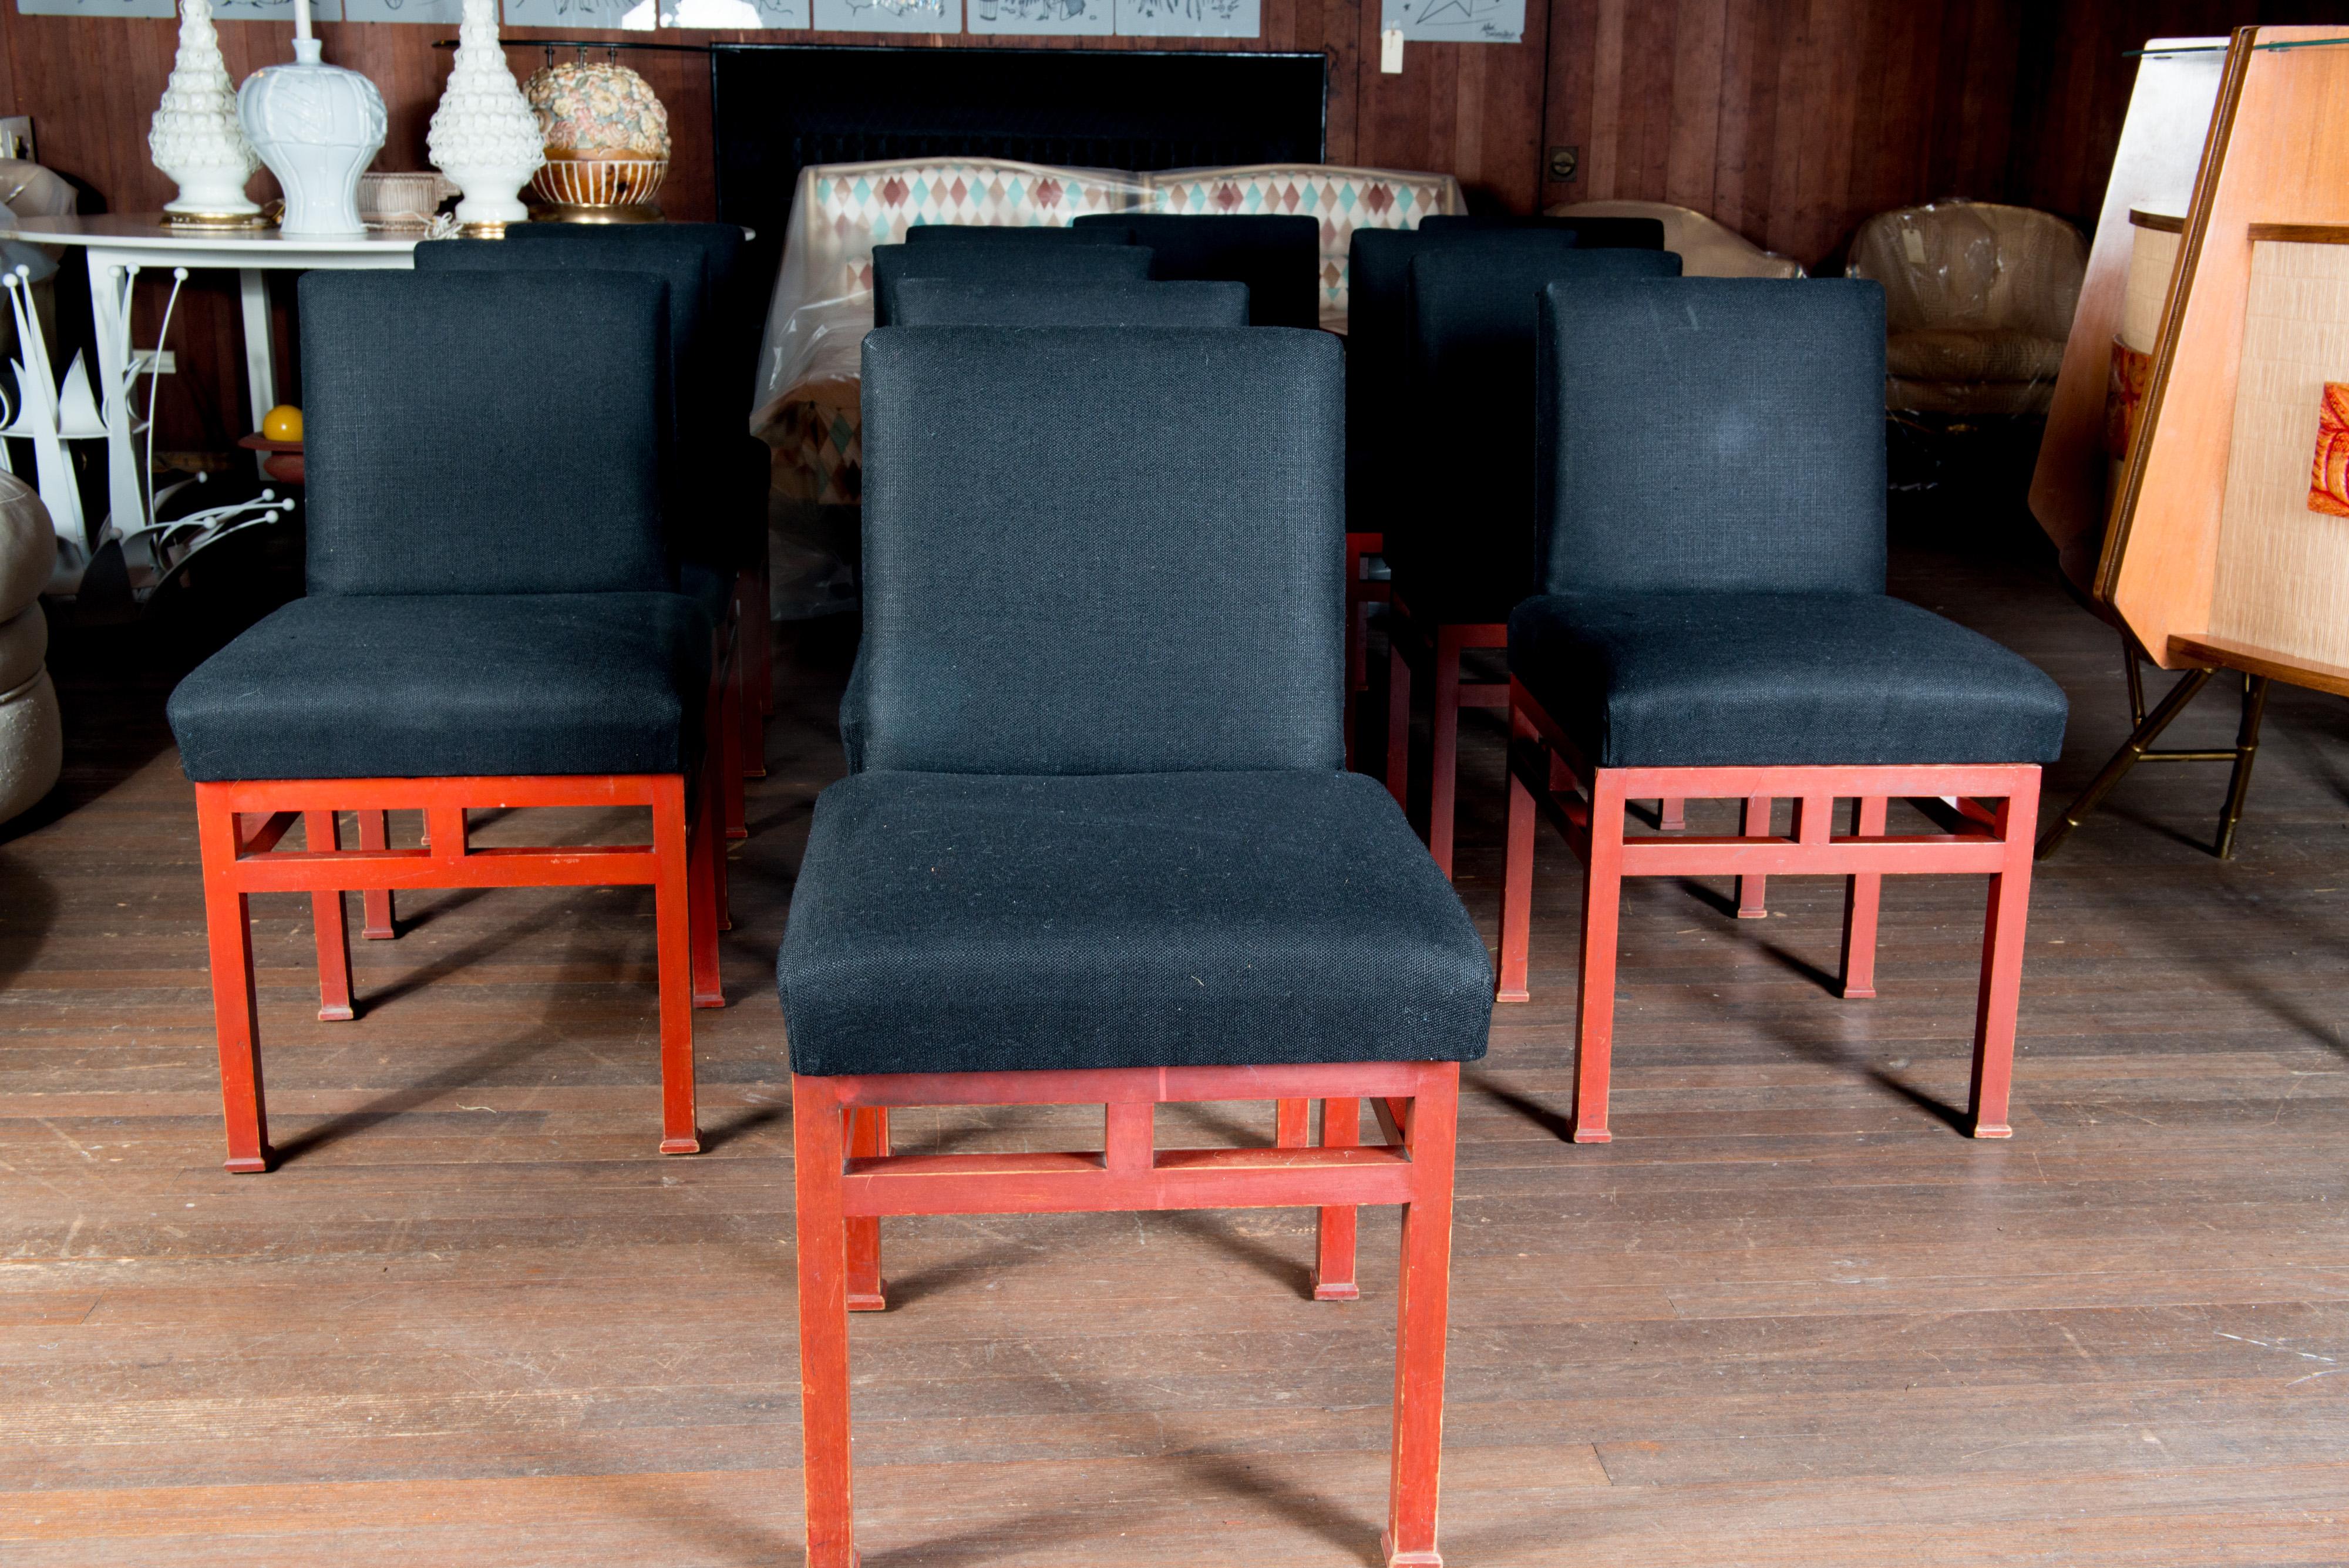 James Mont style set of 12 Moderne red lacquered wood dining chairs with black upholstery. Two arm chairs and ten side chairs. Dating from the 1940s. Midcentury Modern. Original red painted finish. Arm chair: 22.5 wide, 21 deep, 32.5 high, 19 seat